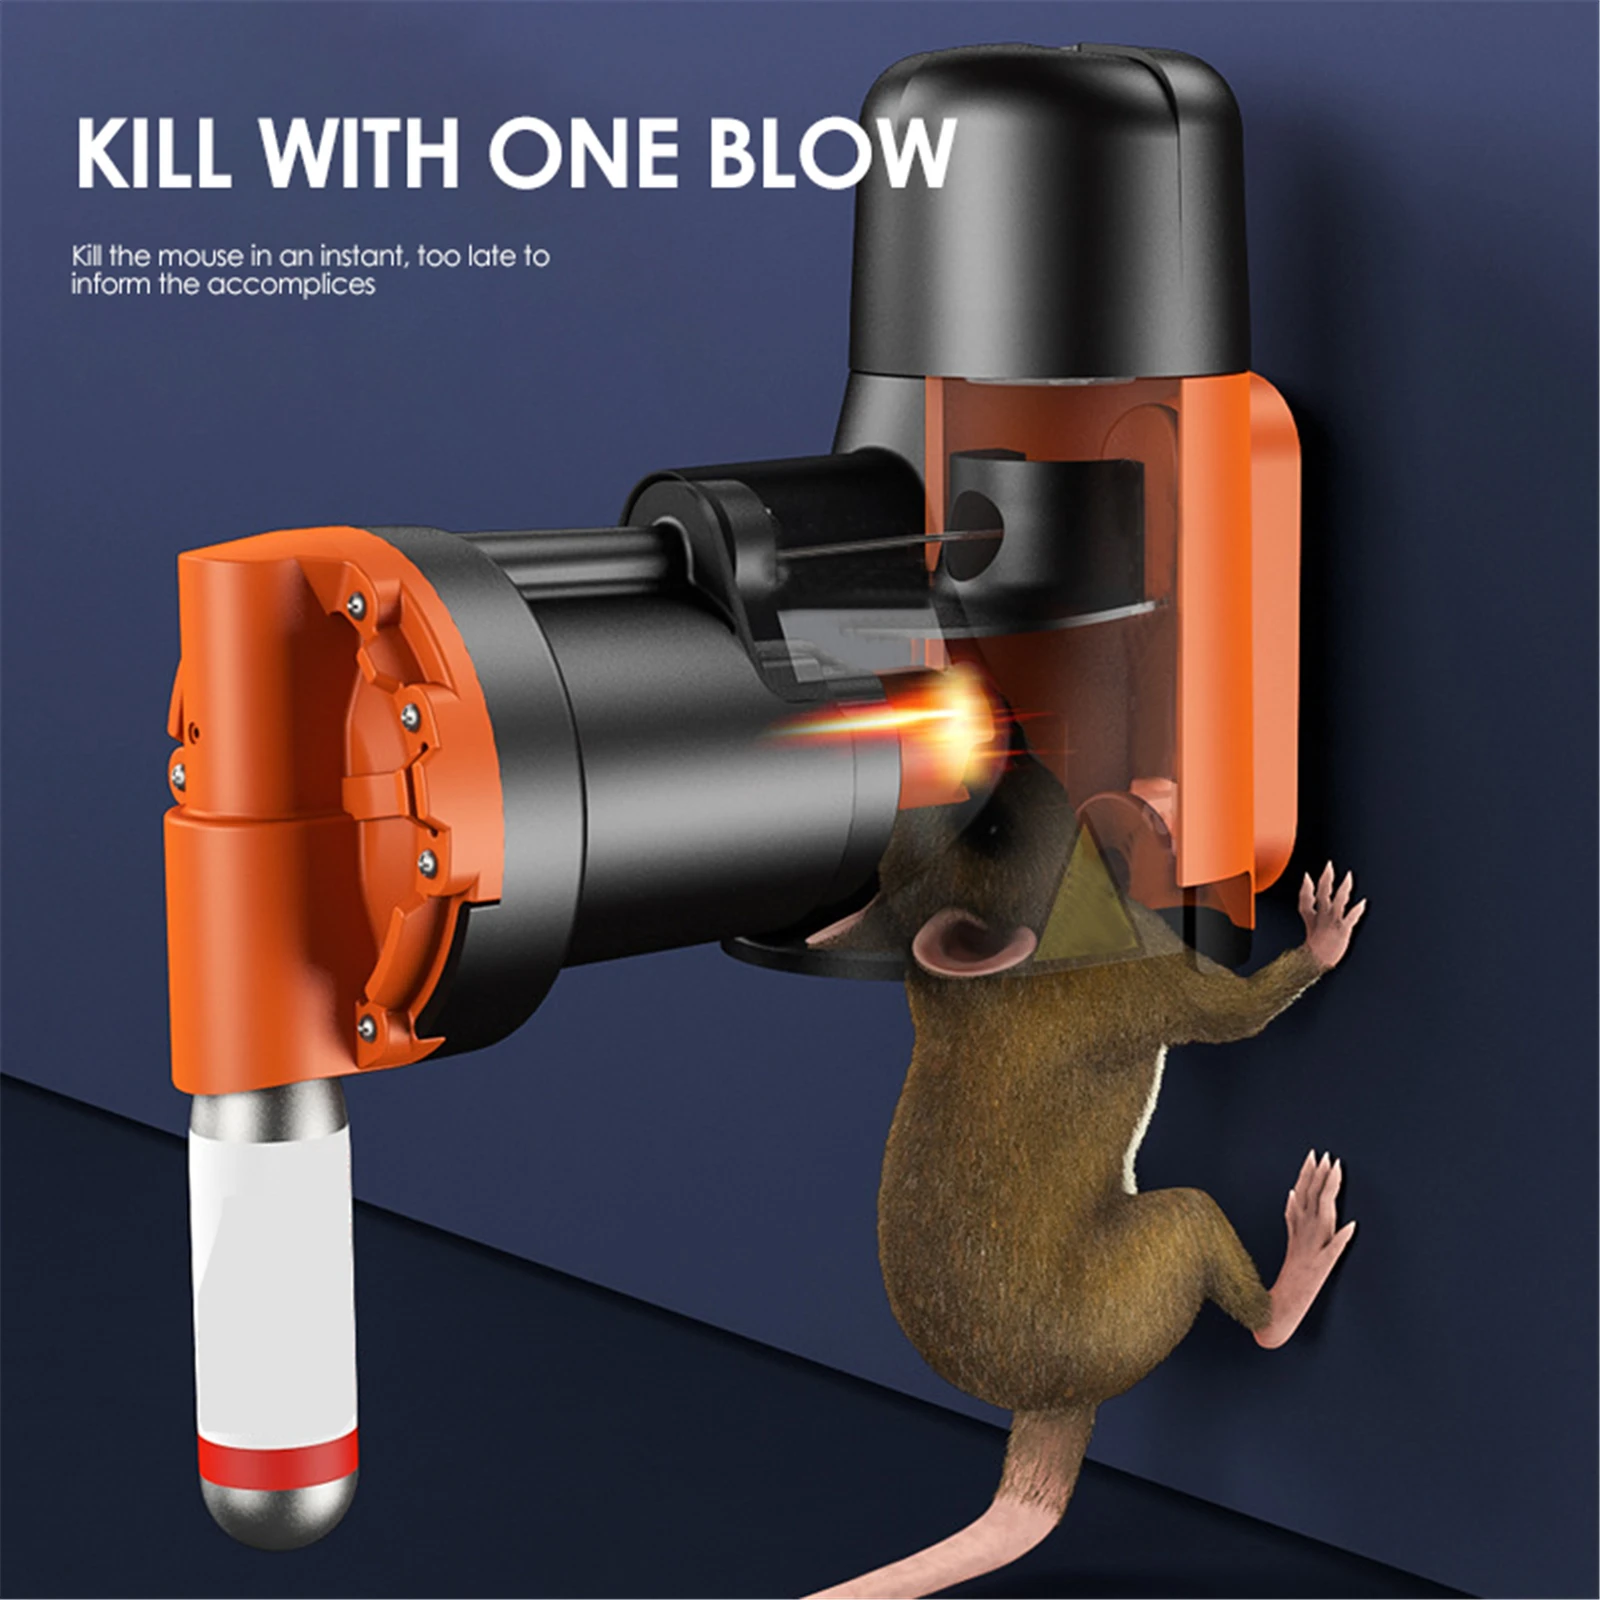 New Smart Humane Non-Poisonous Rat and Mouse Trap Kit Automatic Rat Mouse Multi-catch Trap Machine for CO2 Cylinders For Home